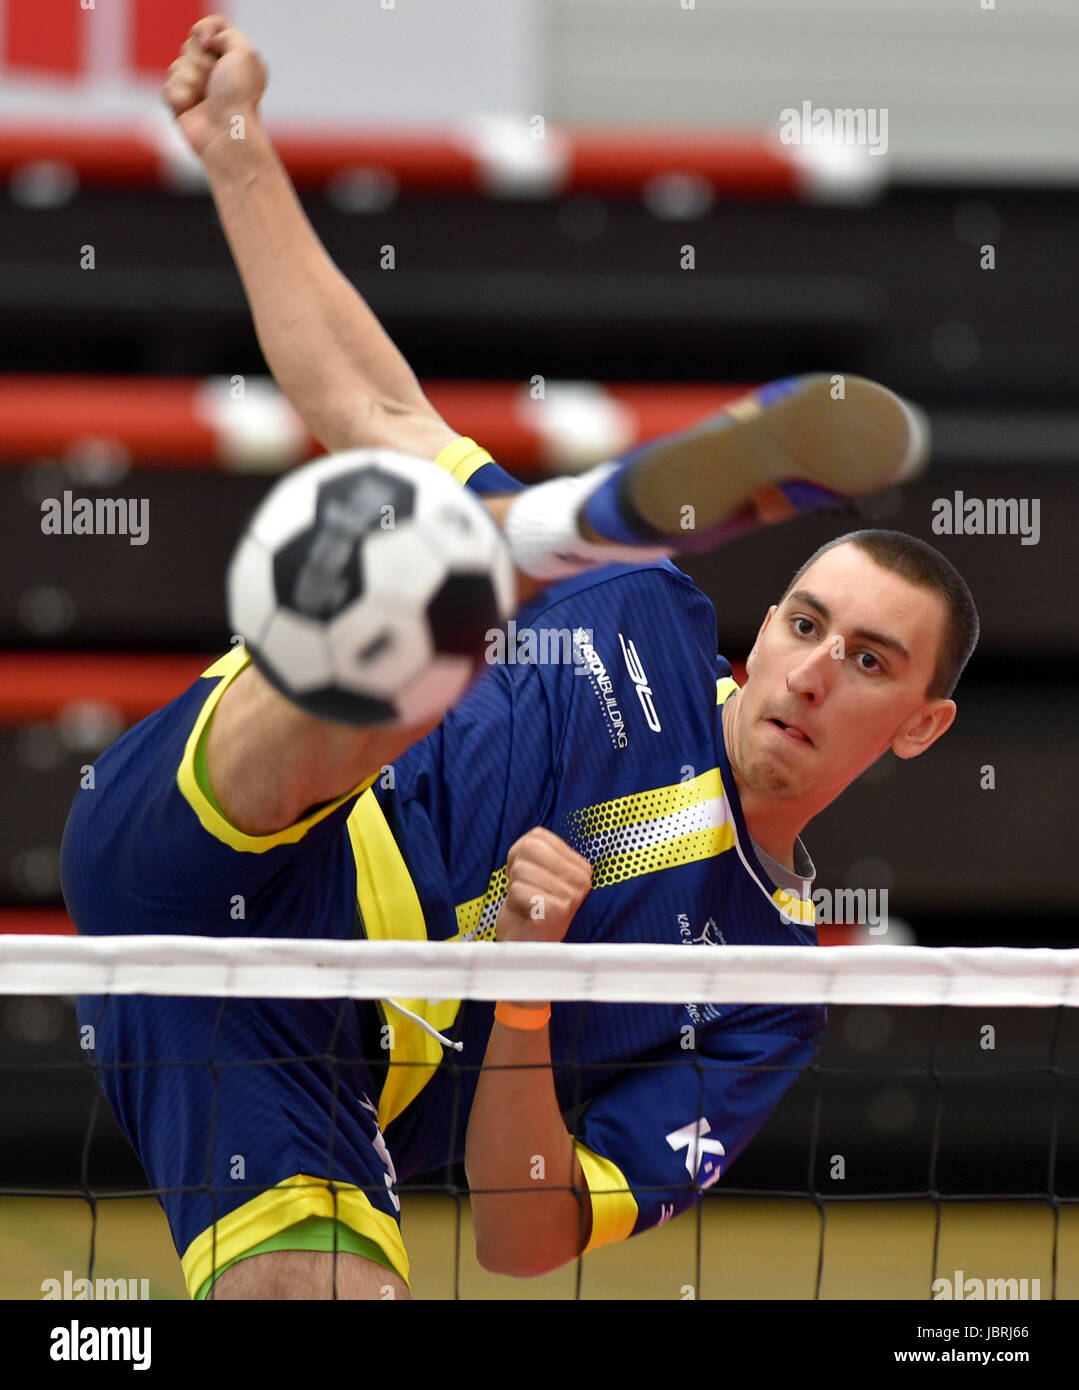 Karlovy Vary, Czech Republic. 10th June, 2017. Branislav Belko (Kosice) in action during the UNIF Club World Cup 2017 match between SK Liapor Witte Karlovy Vary - NO KAC Jednota Kosice in Karlovy Vary, Czech Republic on June 10, 2017. Credit: Slavomir Kubes/CTK Photo/Alamy Live News Stock Photo